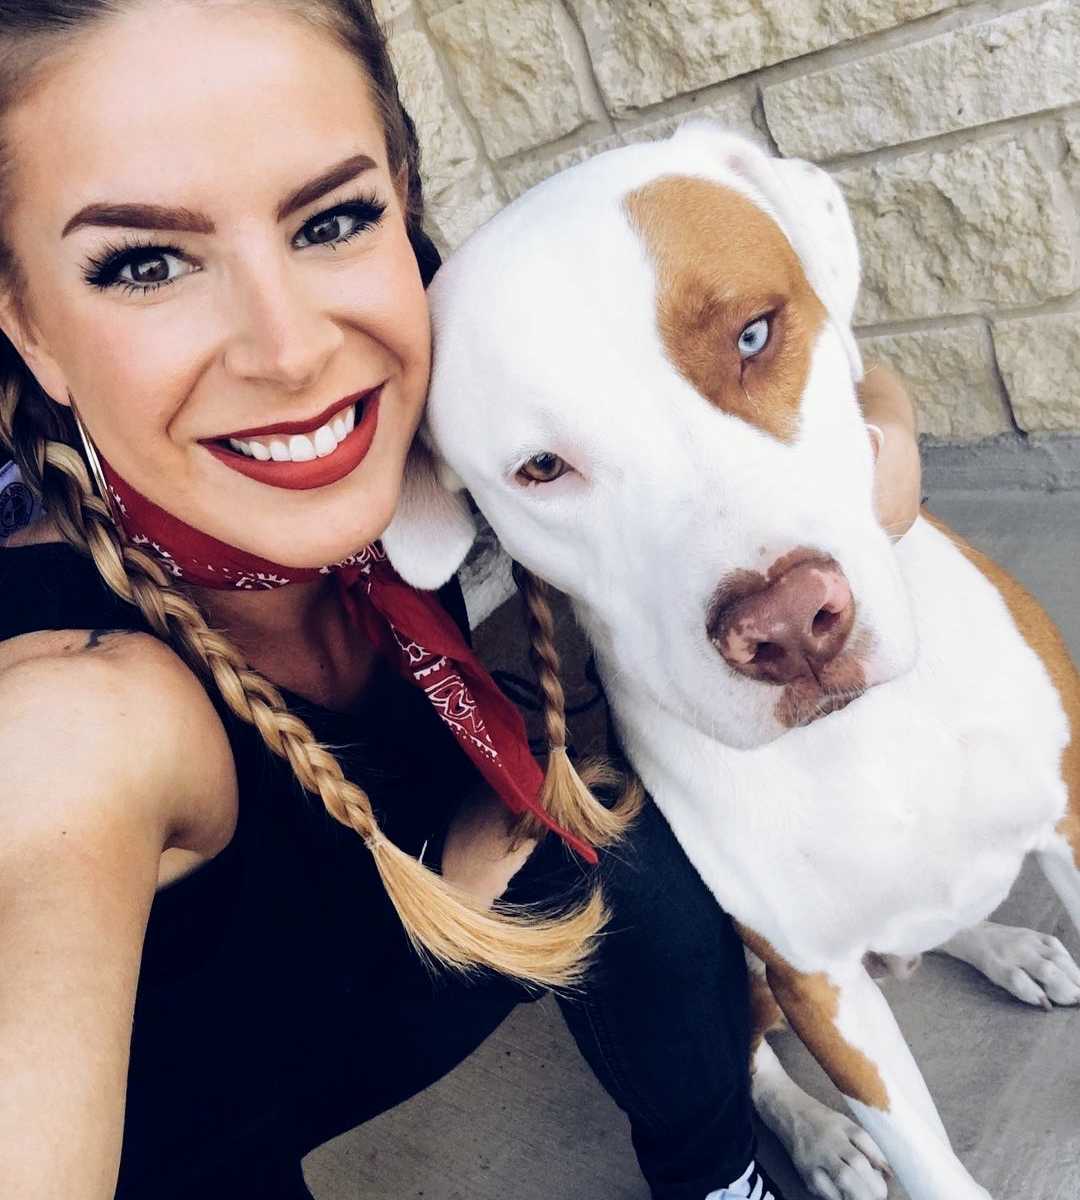 Woman crouches down smiling taking a selfie with dog